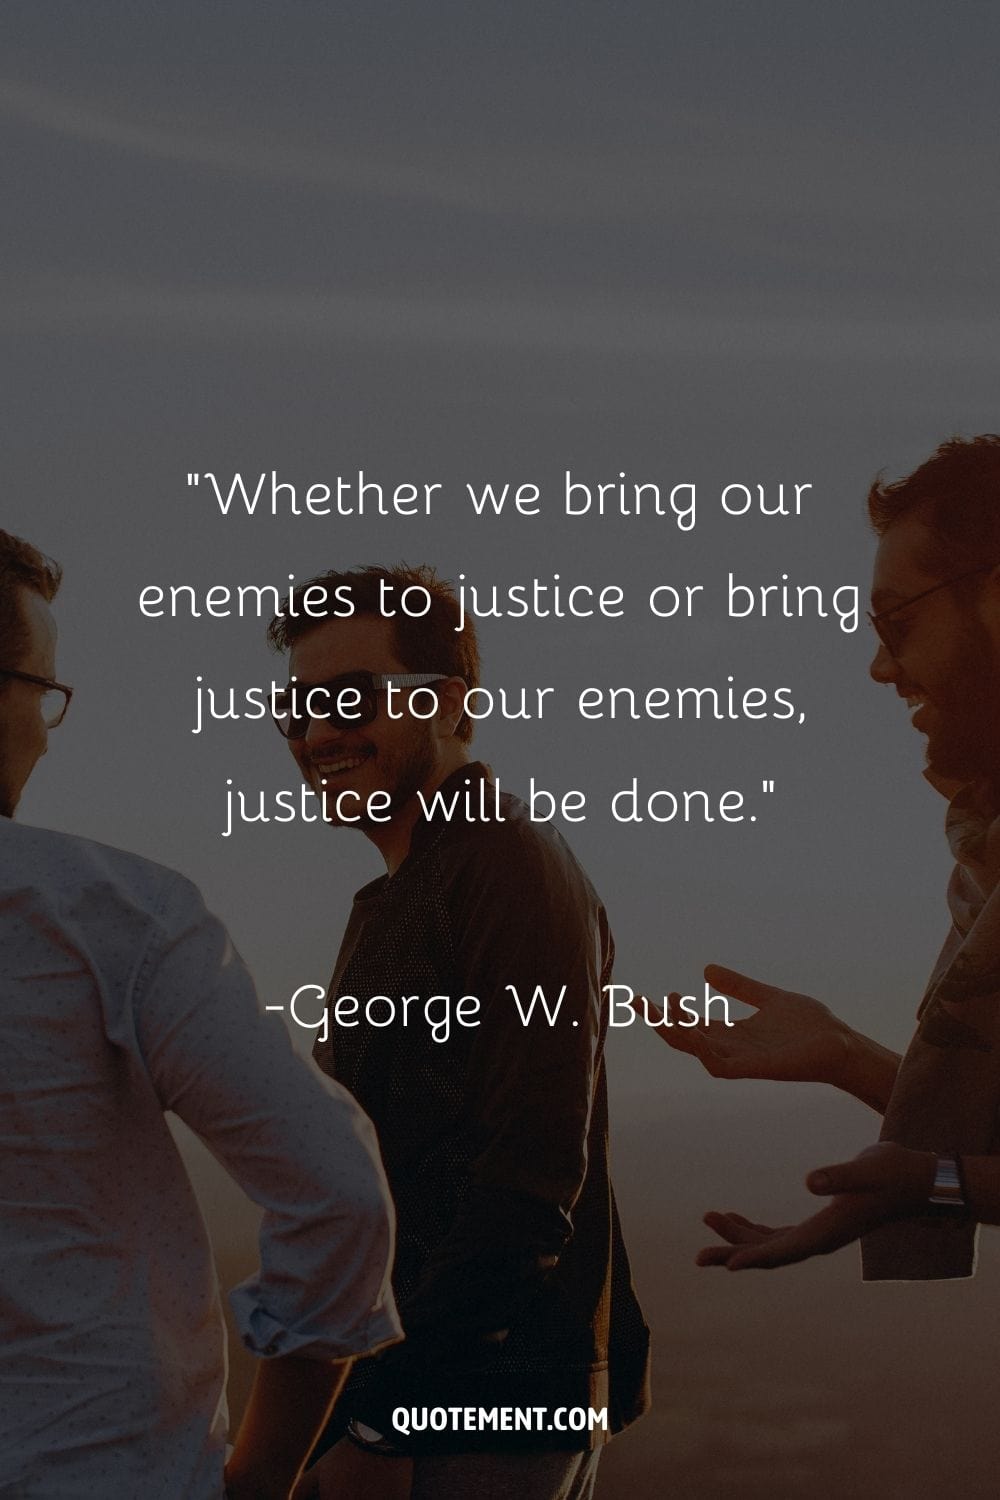 “Whether we bring our enemies to justice or bring justice to our enemies, justice will be done.” — George W. Bush, 1946-, American President